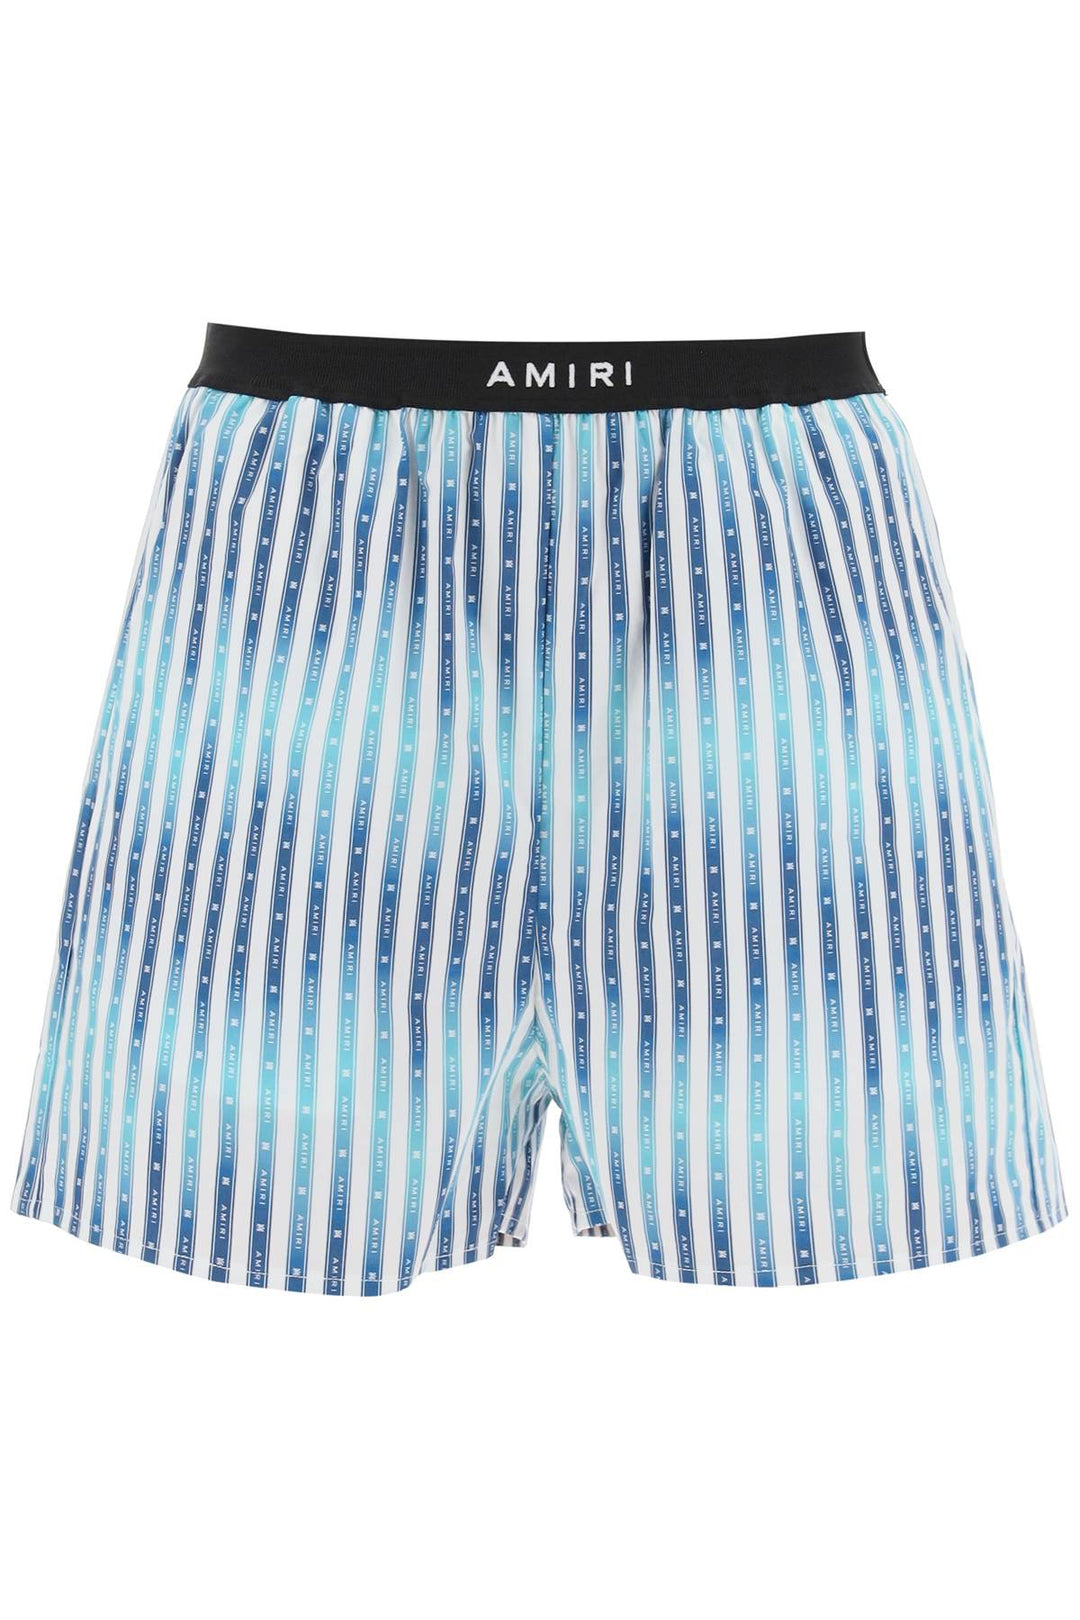 Shorts In Popeline A Righe - Amiri - Donna